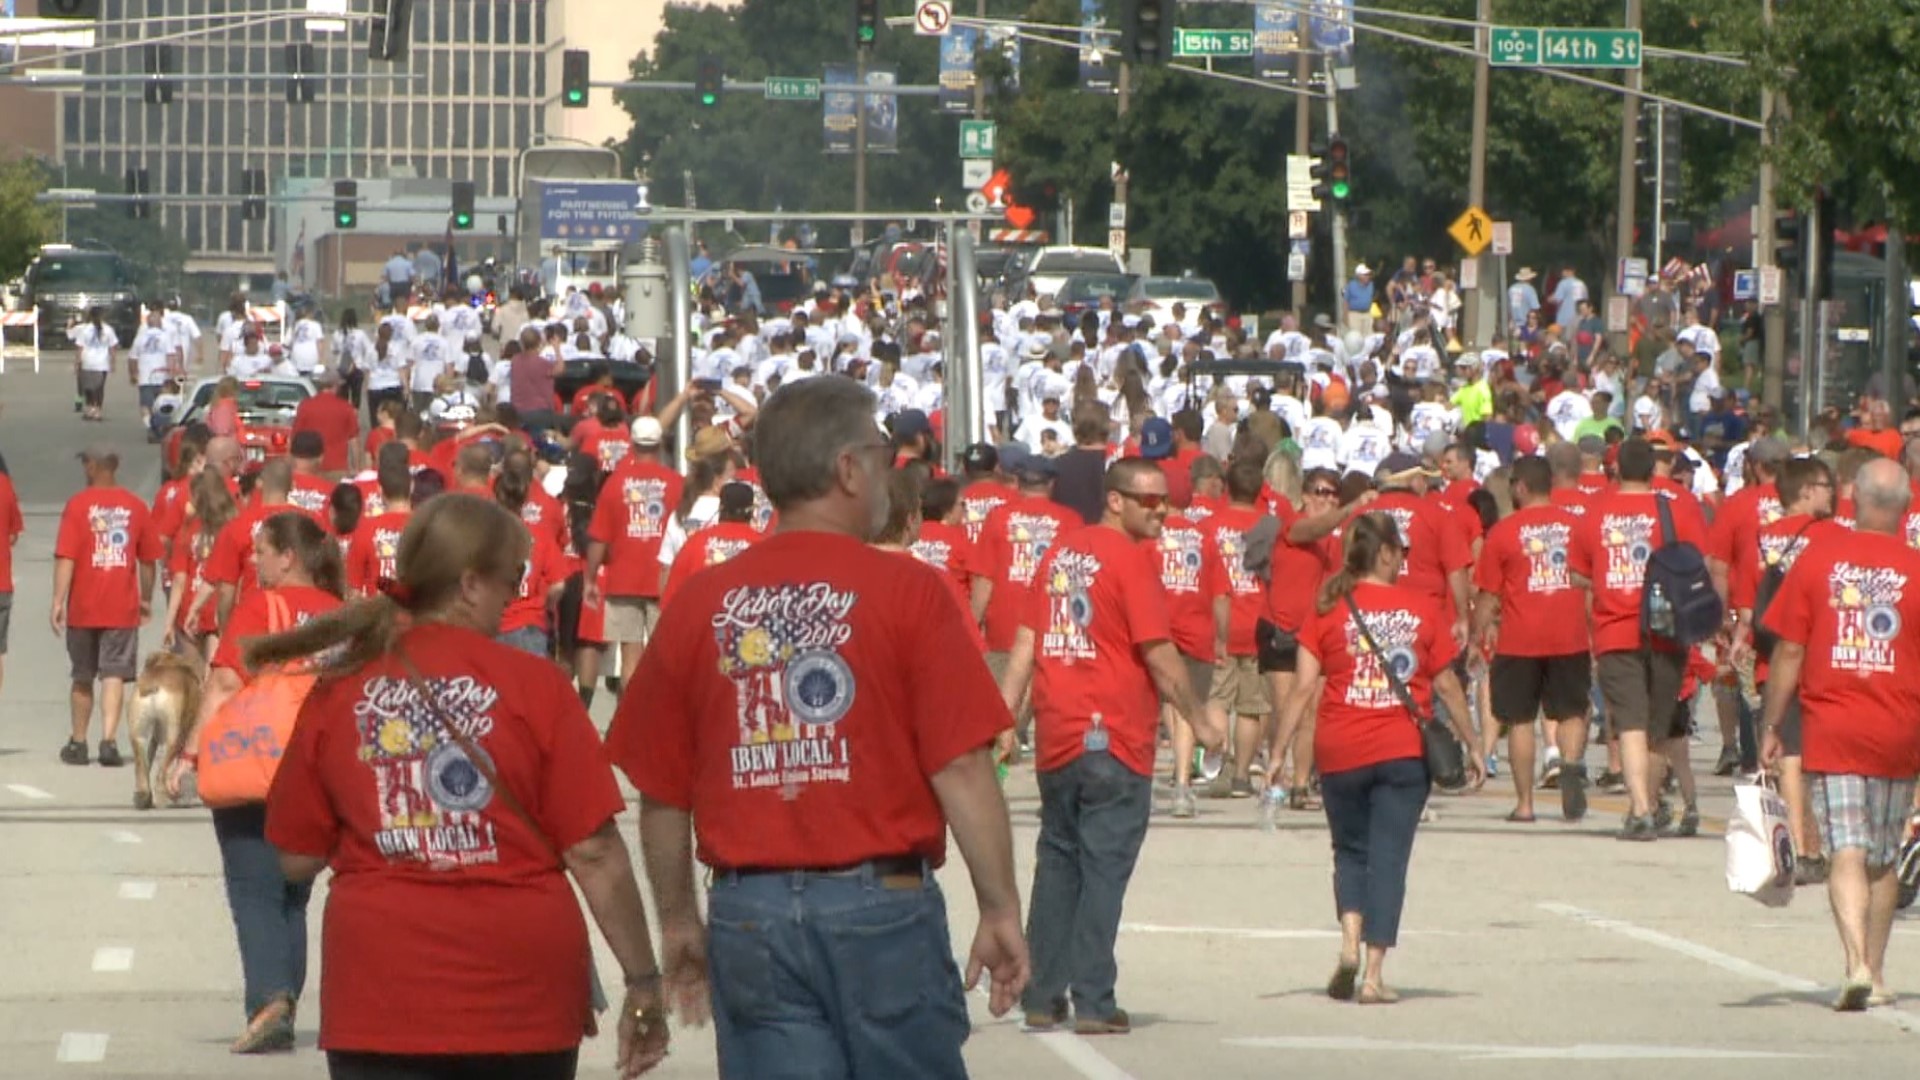 The head of the St. Louis Labor Council expressed frustration over a lack of vaccinations in the St. Louis area, which led to the parade being canceled again